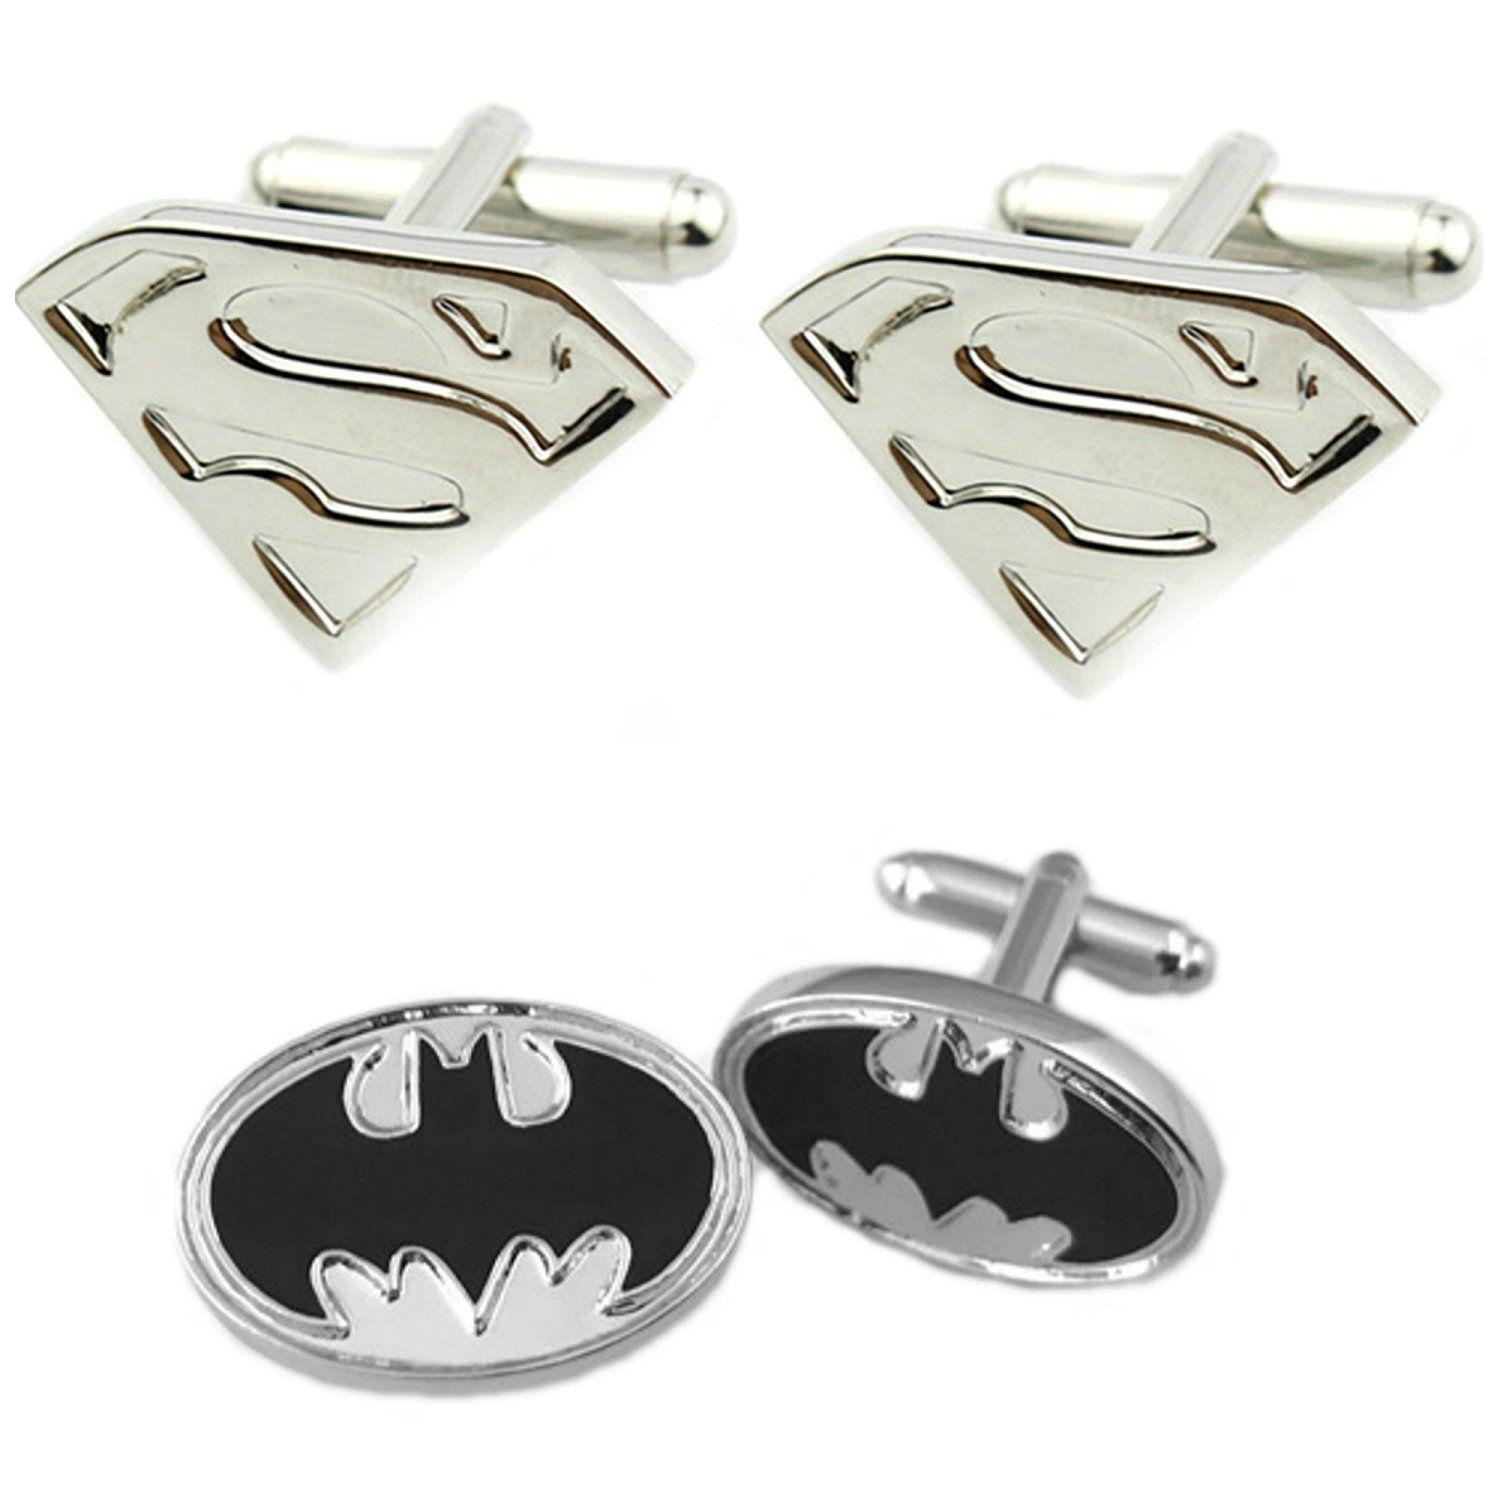 Black and Silver Superman Logo - Cheap Black And Silver Superman Logo, find Black And Silver Superman